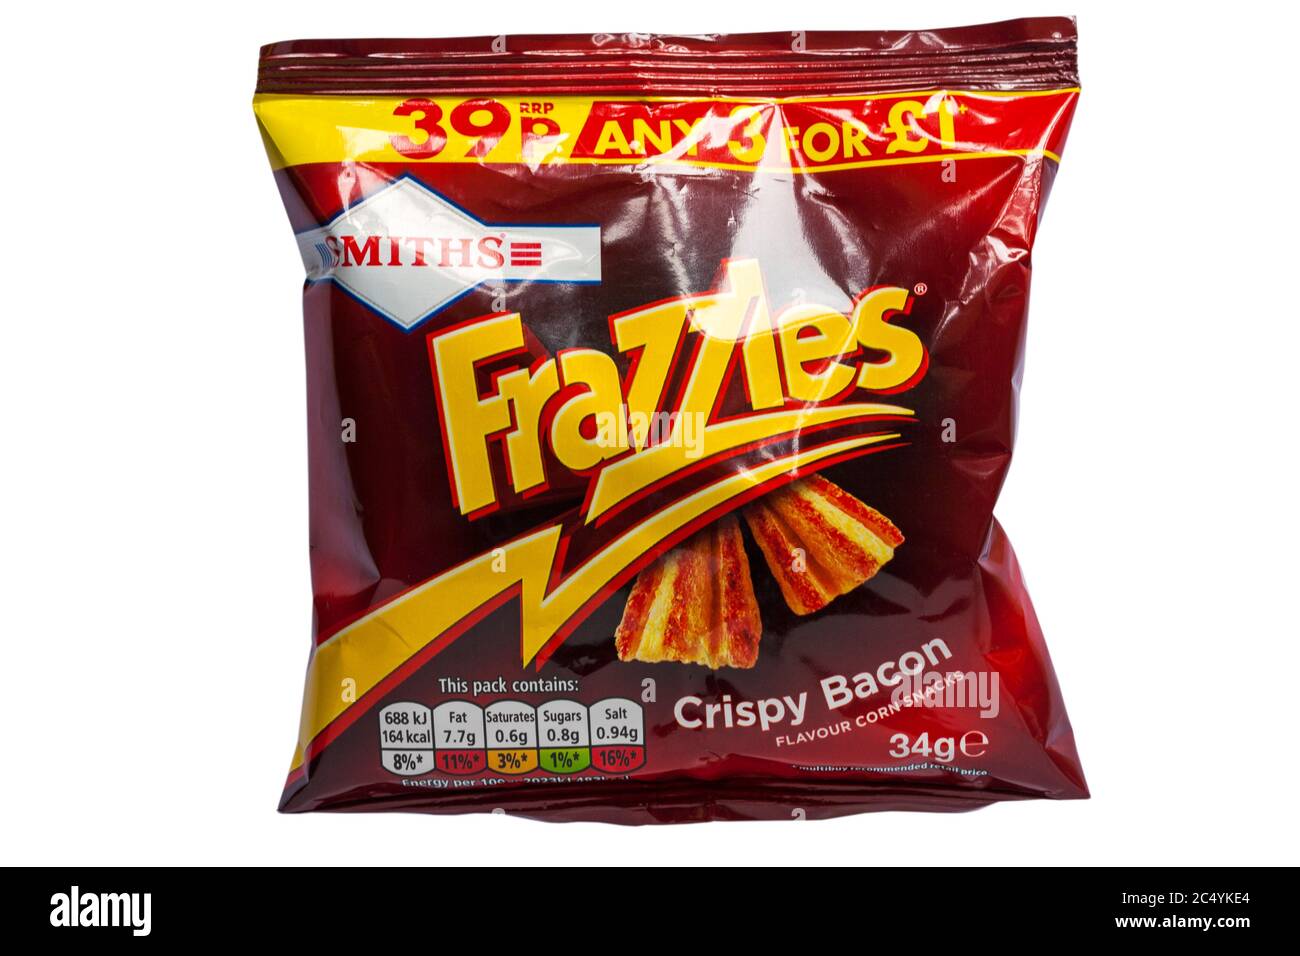 packet of Smiths Frazzles Crispy Bacon flavour corn snacks isolated on white background Stock Photo